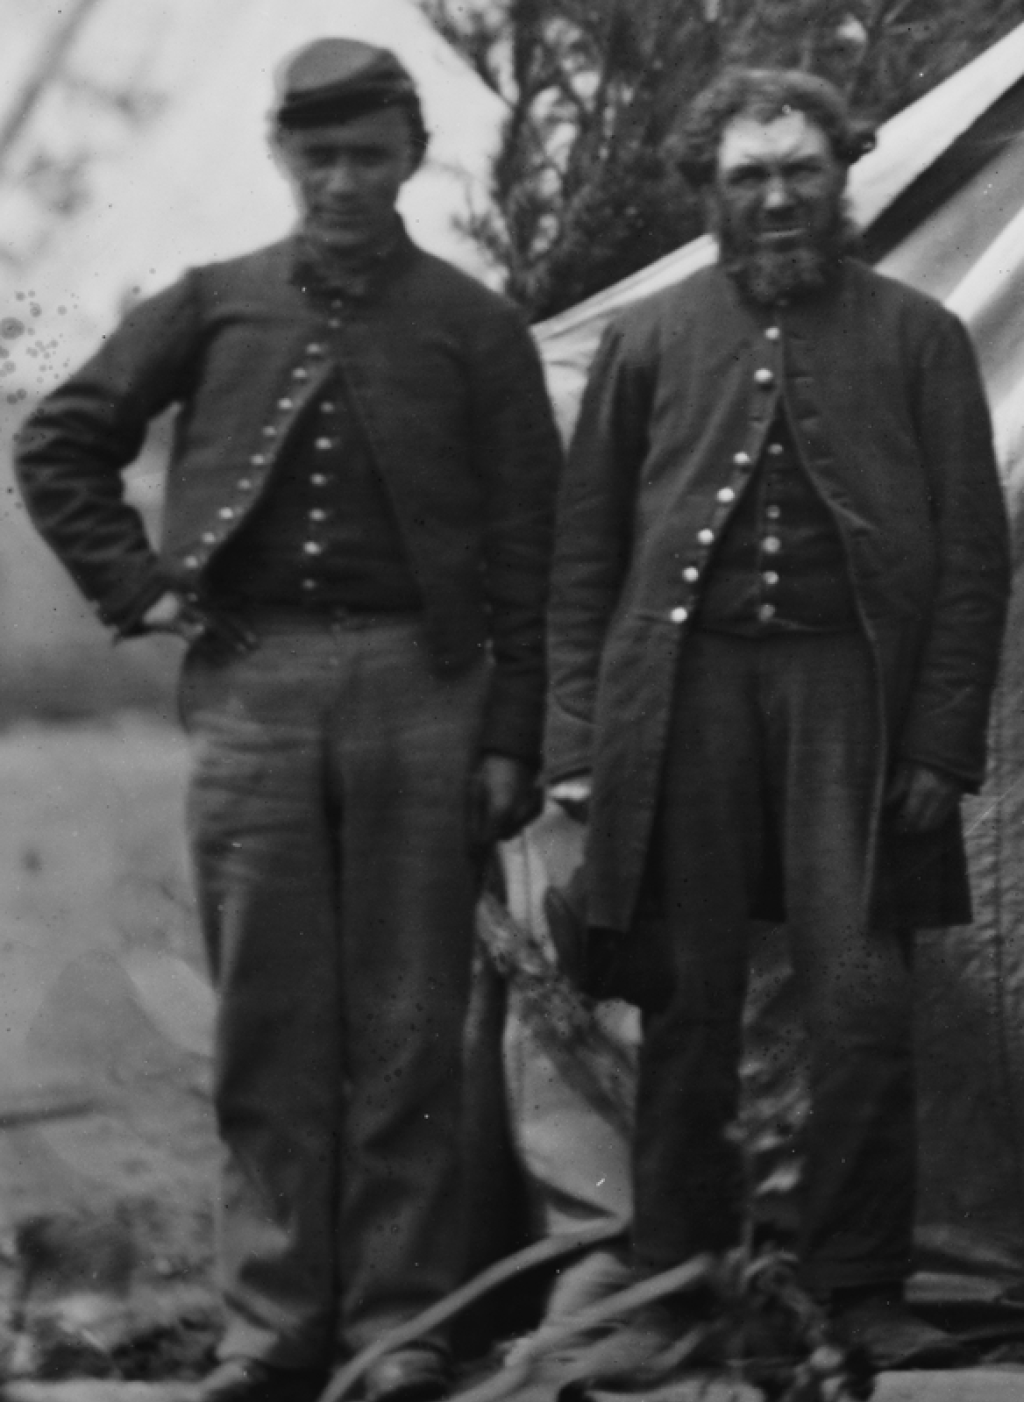 Two enlisted men, 1860s.